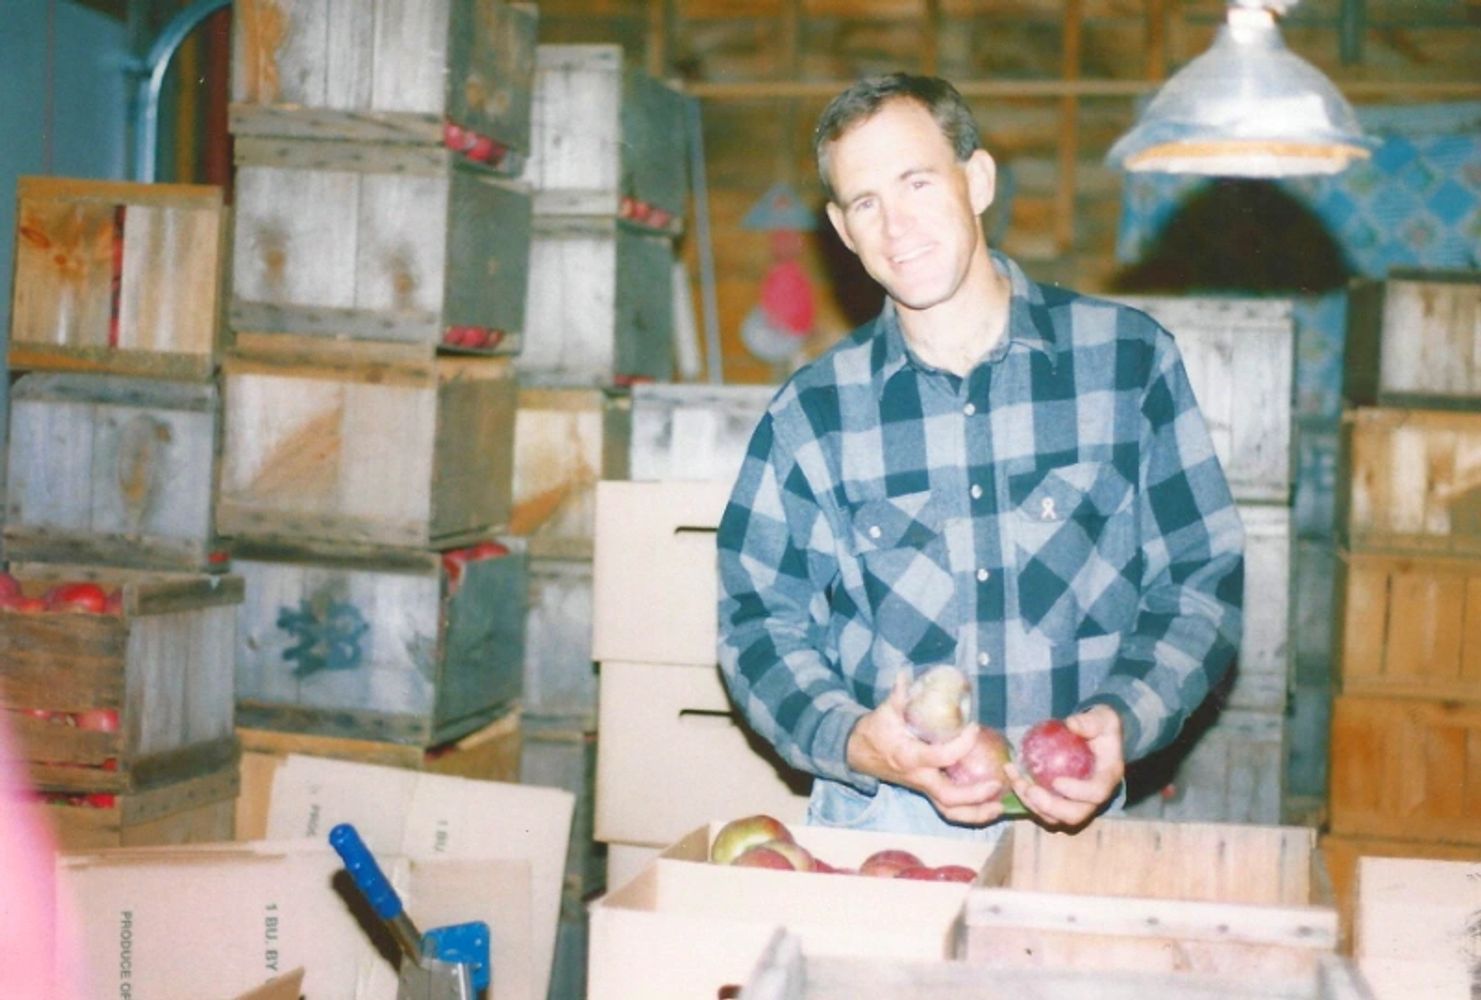 gil barden holding red apples